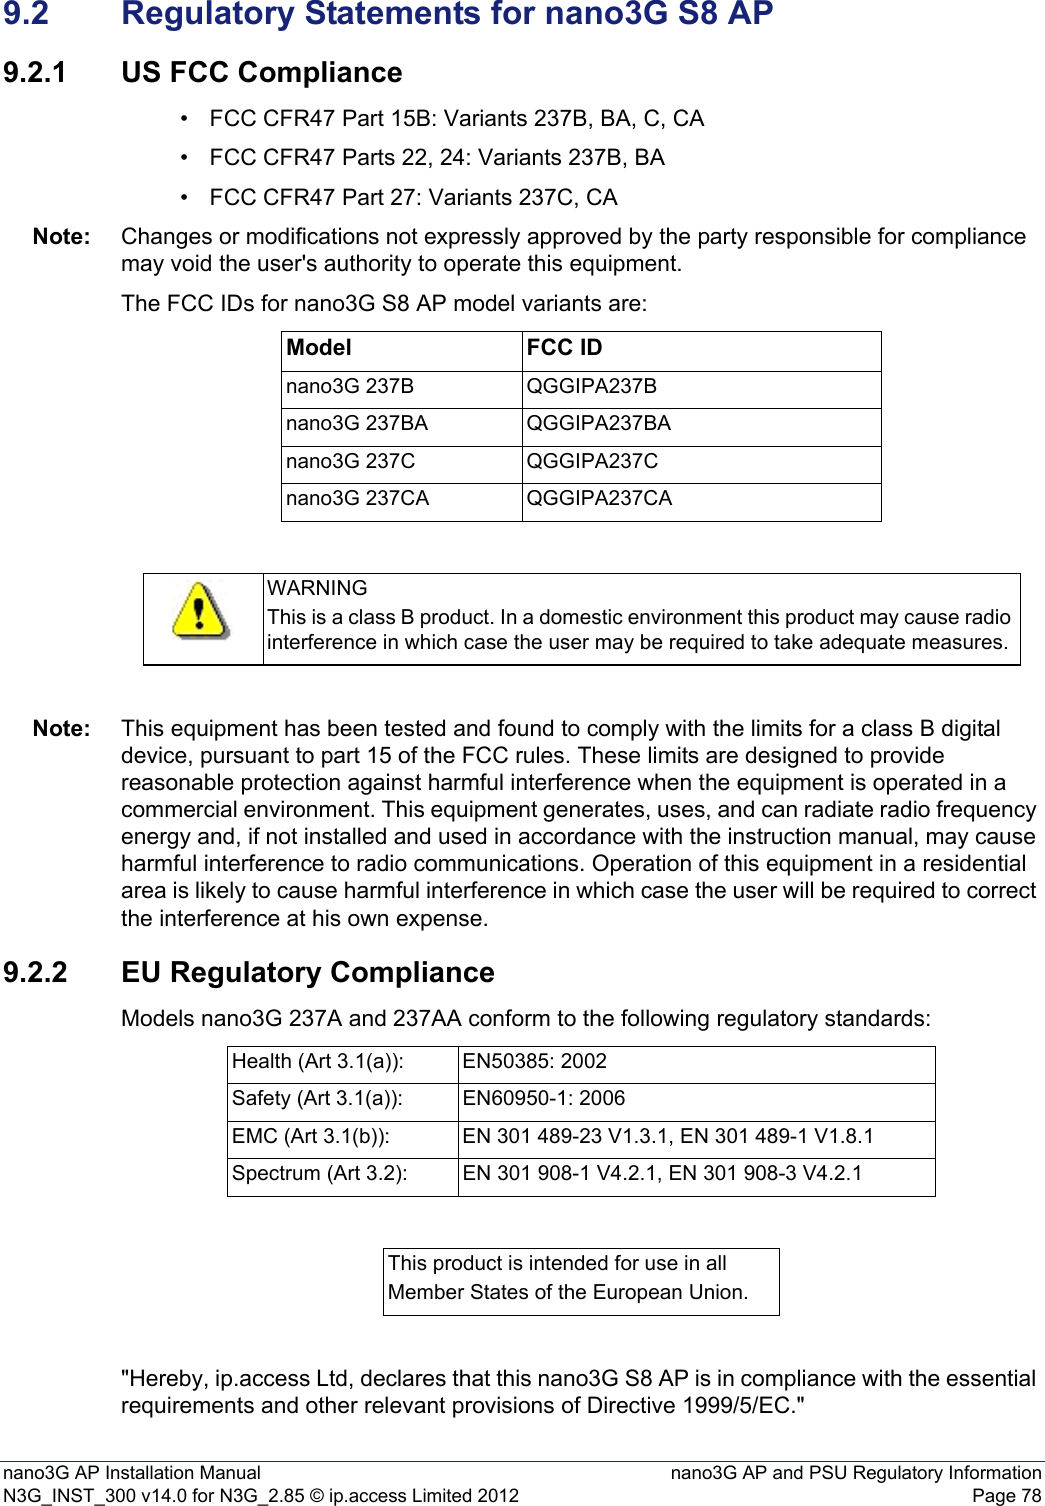 nano3G AP Installation Manual nano3G AP and PSU Regulatory InformationN3G_INST_300 v14.0 for N3G_2.85 © ip.access Limited 2012 Page 789.2 Regulatory Statements for nano3G S8 AP9.2.1 US FCC Compliance• FCC CFR47 Part 15B: Variants 237B, BA, C, CA• FCC CFR47 Parts 22, 24: Variants 237B, BA• FCC CFR47 Part 27: Variants 237C, CANote: Changes or modifications not expressly approved by the party responsible for compliance may void the user&apos;s authority to operate this equipment.The FCC IDs for nano3G S8 AP model variants are:Note: This equipment has been tested and found to comply with the limits for a class B digital device, pursuant to part 15 of the FCC rules. These limits are designed to provide reasonable protection against harmful interference when the equipment is operated in a commercial environment. This equipment generates, uses, and can radiate radio frequency energy and, if not installed and used in accordance with the instruction manual, may cause harmful interference to radio communications. Operation of this equipment in a residential area is likely to cause harmful interference in which case the user will be required to correct the interference at his own expense.9.2.2 EU Regulatory ComplianceModels nano3G 237A and 237AA conform to the following regulatory standards:&quot;Hereby, ip.access Ltd, declares that this nano3G S8 AP is in compliance with the essential requirements and other relevant provisions of Directive 1999/5/EC.&quot;Model FCC IDnano3G 237B QGGIPA237Bnano3G 237BA QGGIPA237BAnano3G 237C QGGIPA237Cnano3G 237CA QGGIPA237CAWARNINGThis is a class B product. In a domestic environment this product may cause radio interference in which case the user may be required to take adequate measures.Health (Art 3.1(a)): EN50385: 2002Safety (Art 3.1(a)): EN60950-1: 2006EMC (Art 3.1(b)): EN 301 489-23 V1.3.1, EN 301 489-1 V1.8.1Spectrum (Art 3.2): EN 301 908-1 V4.2.1, EN 301 908-3 V4.2.1This product is intended for use in allMember States of the European Union.